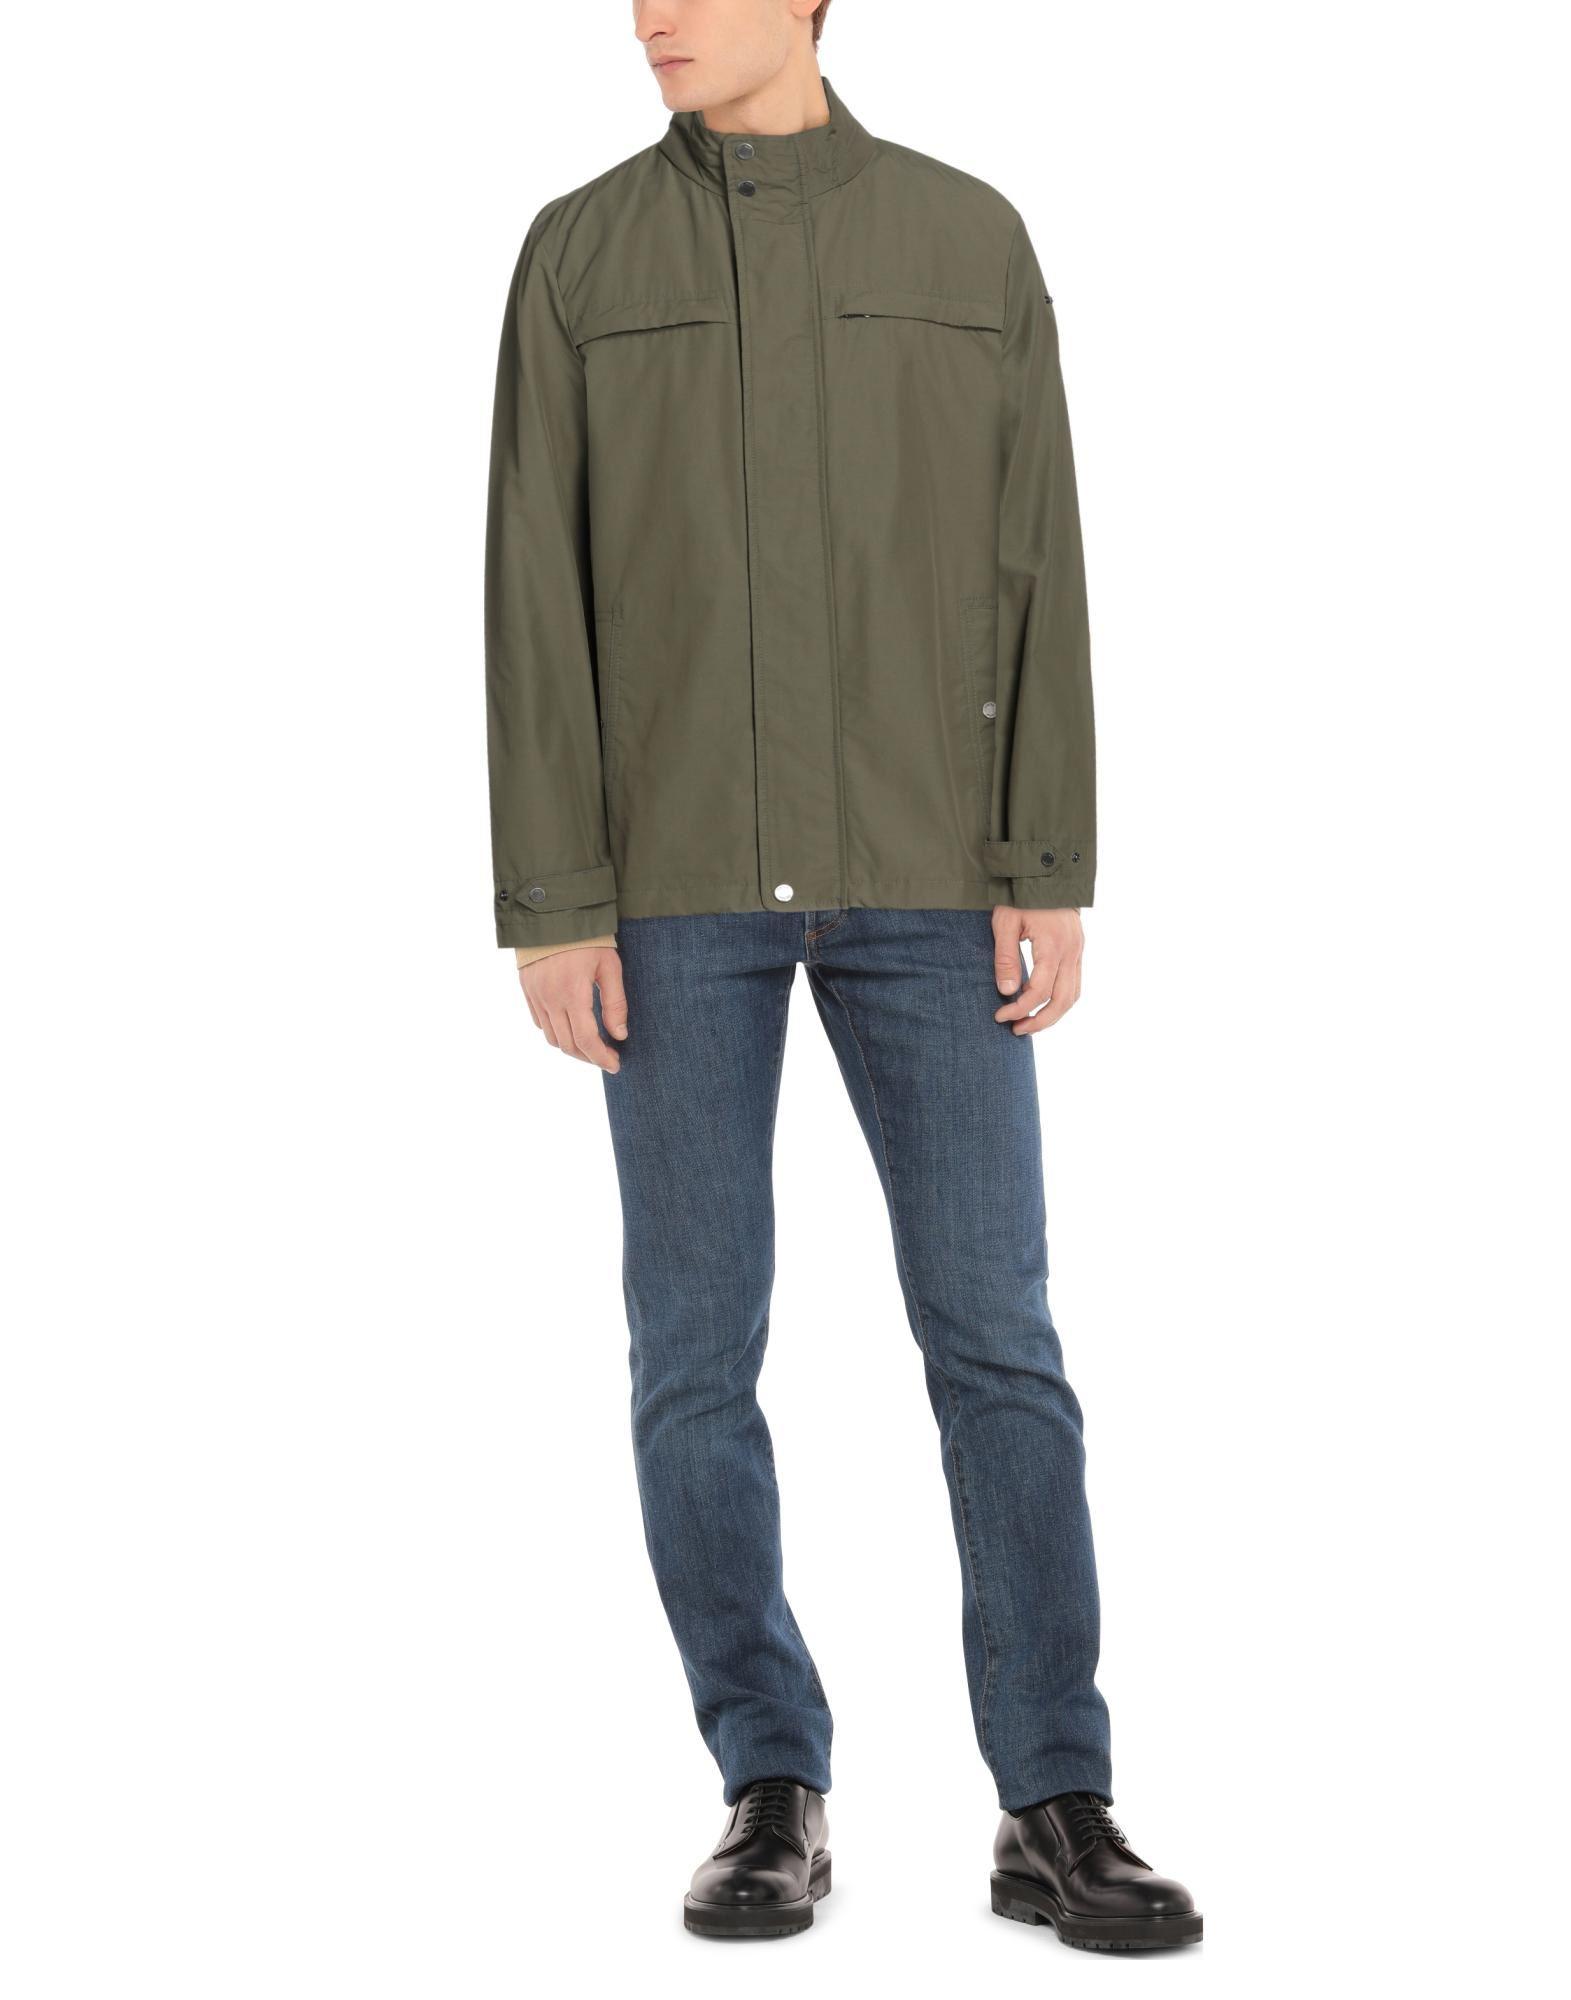 Geox Jacket in Military Green (Green) for Men | Lyst